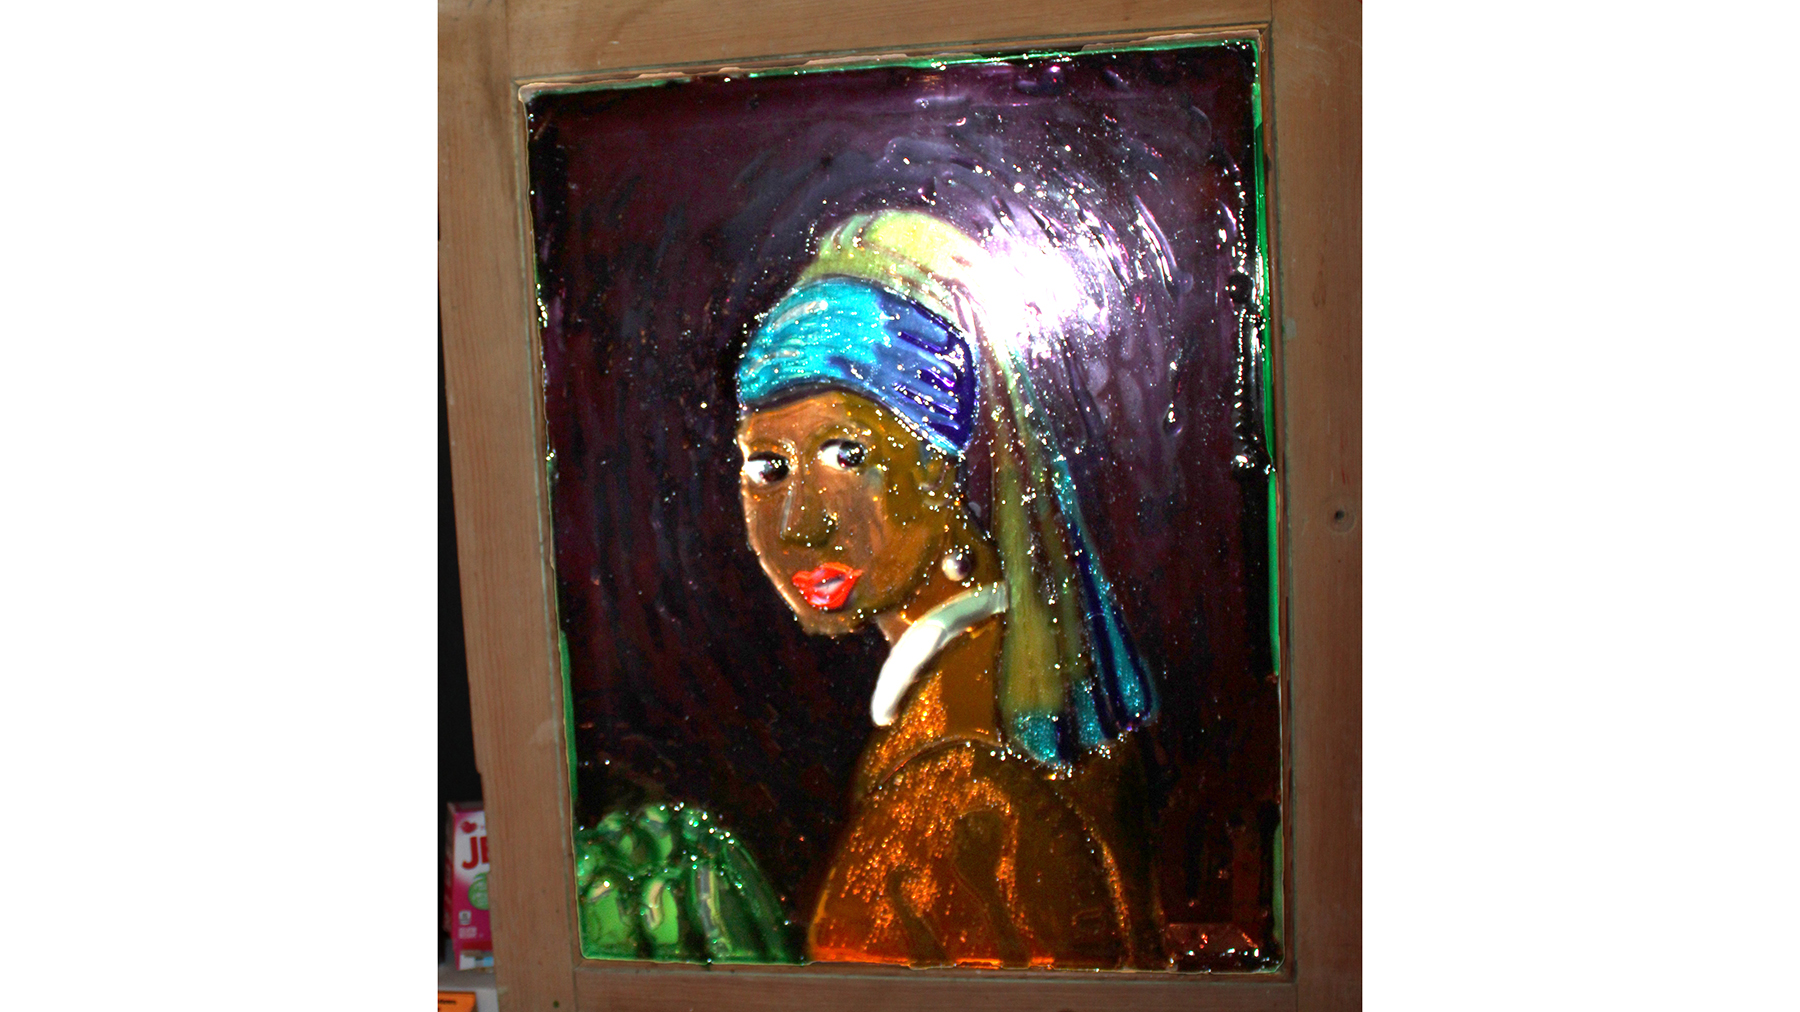 2024 Jell-O No. 13 by Jim Good: Girl with a Pearl Earring and Jello for Best Tale Told by a Human